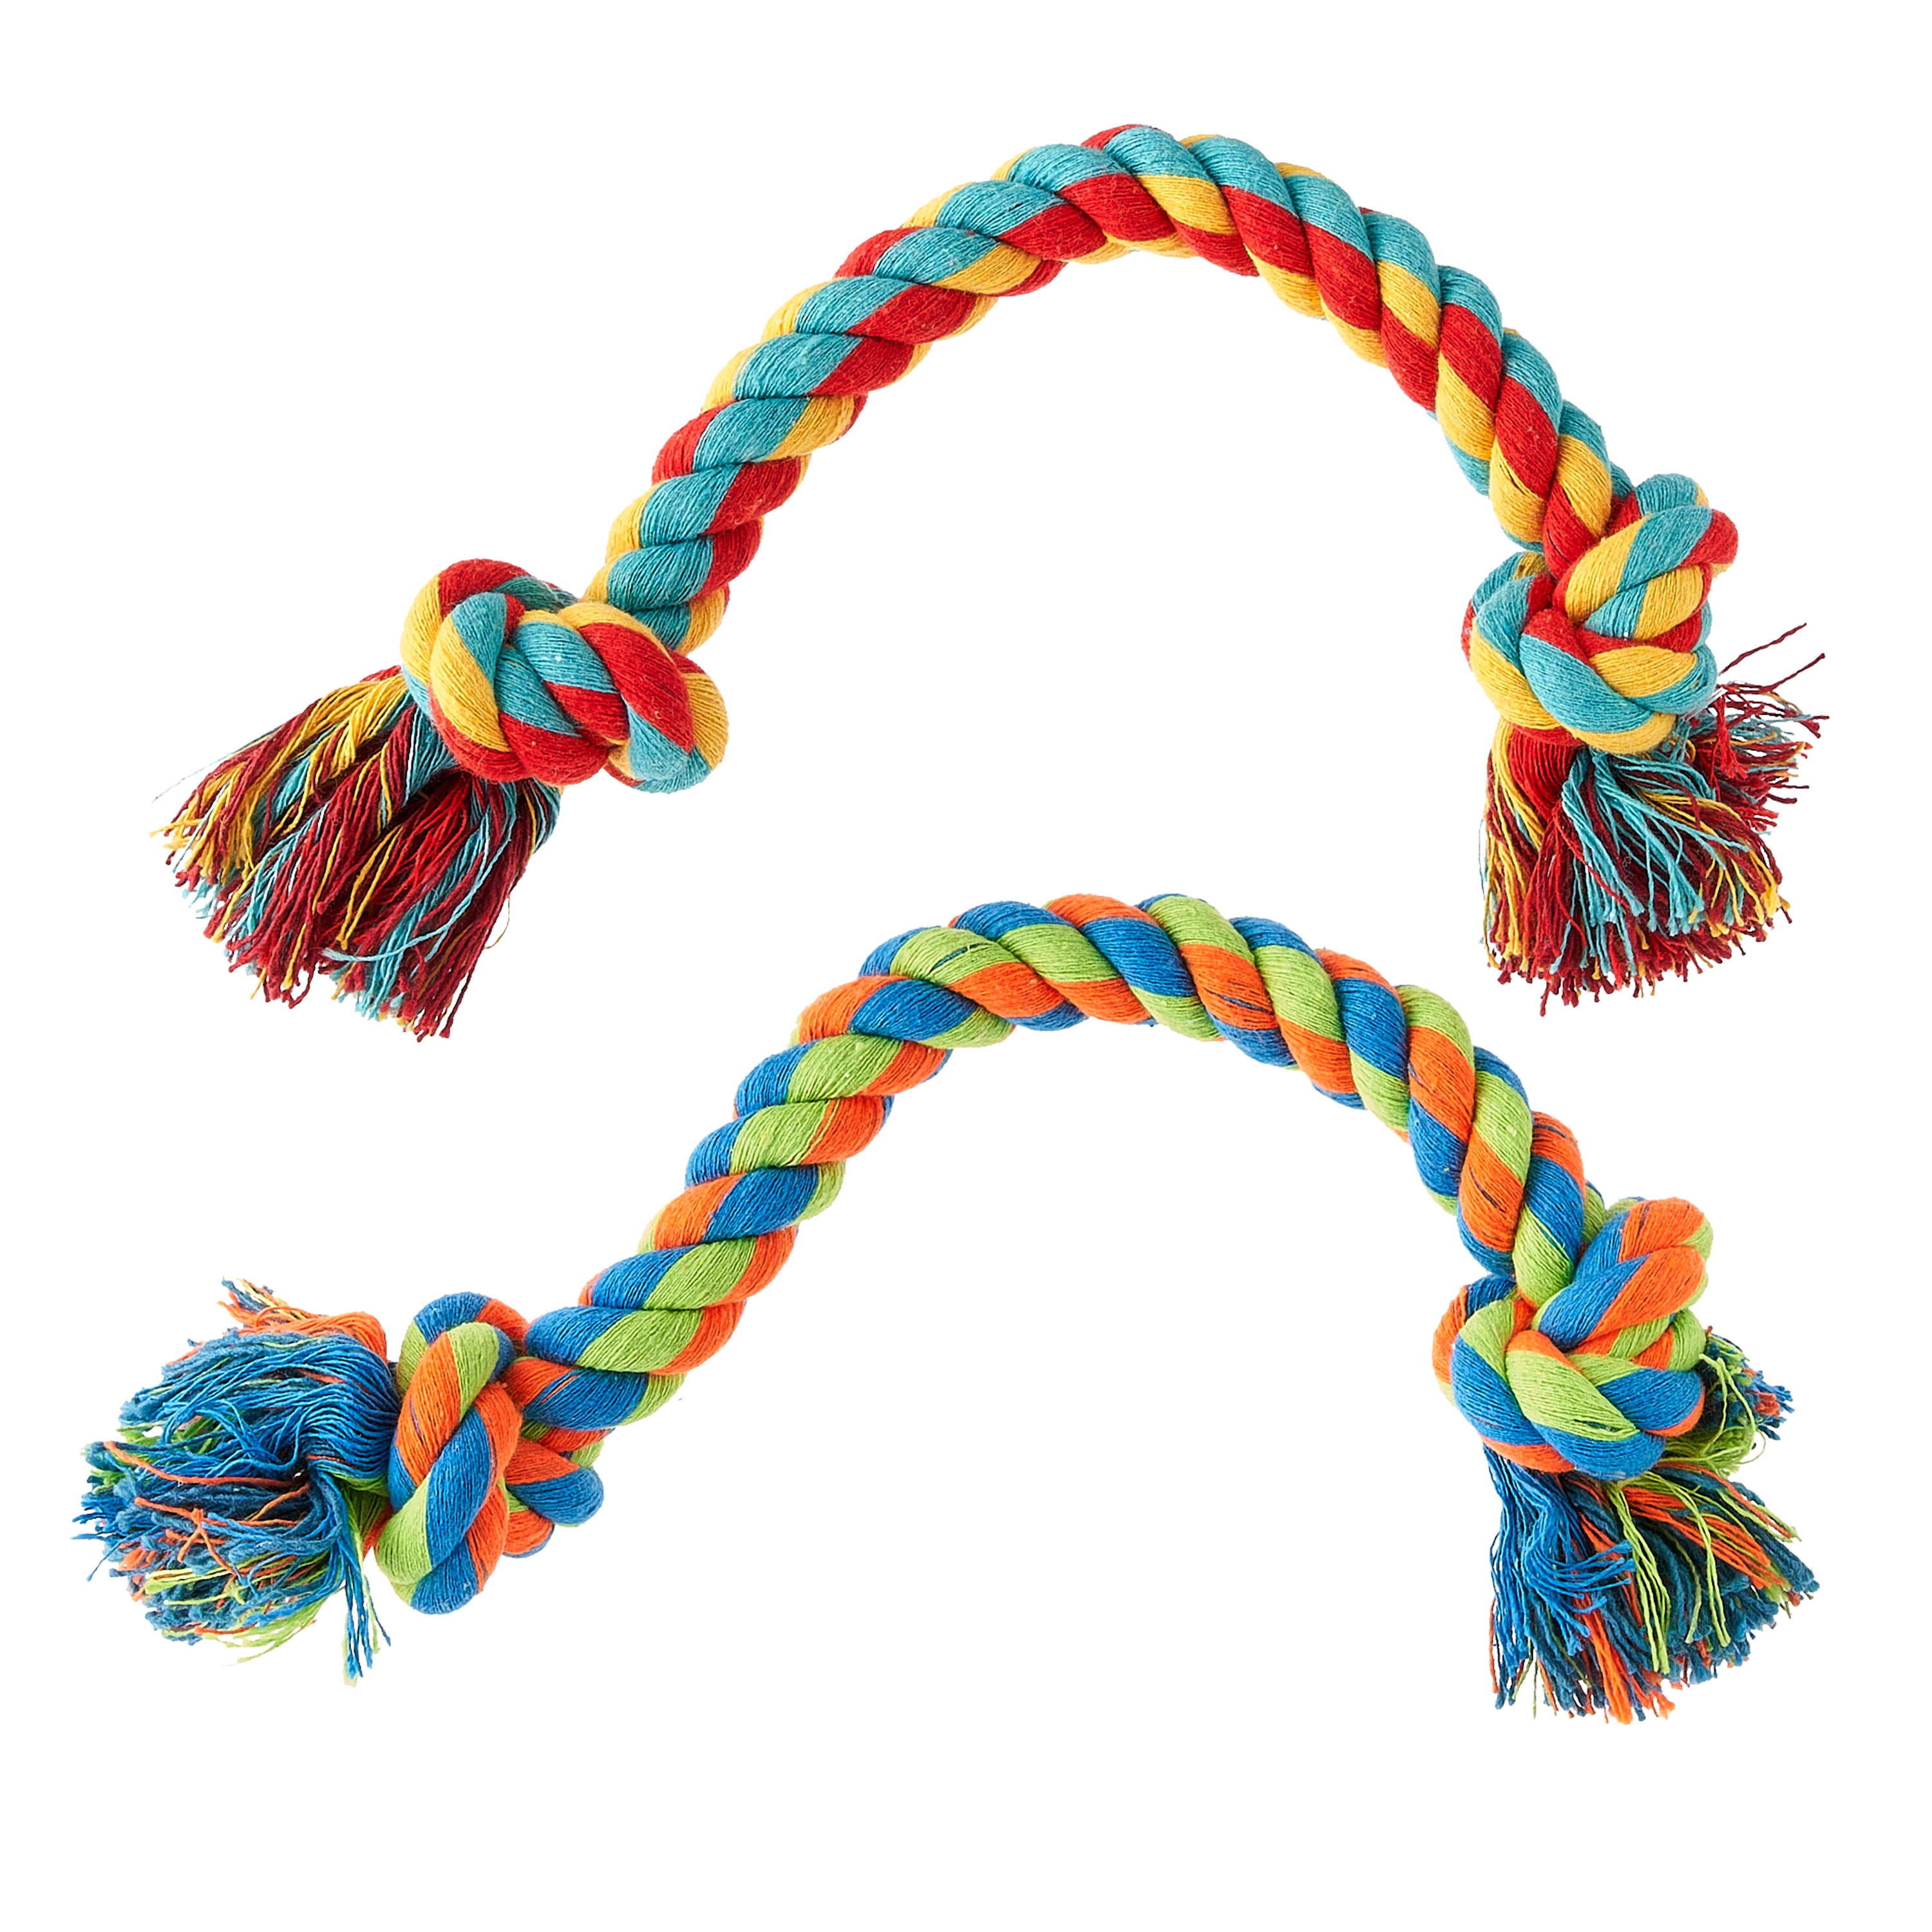 Vibrant Life Tug Buddy Rope Chew Dog Toy, Knotted Braid Rope, Multi-Colored, Chew Level 1 for Light Chewing, Assorted